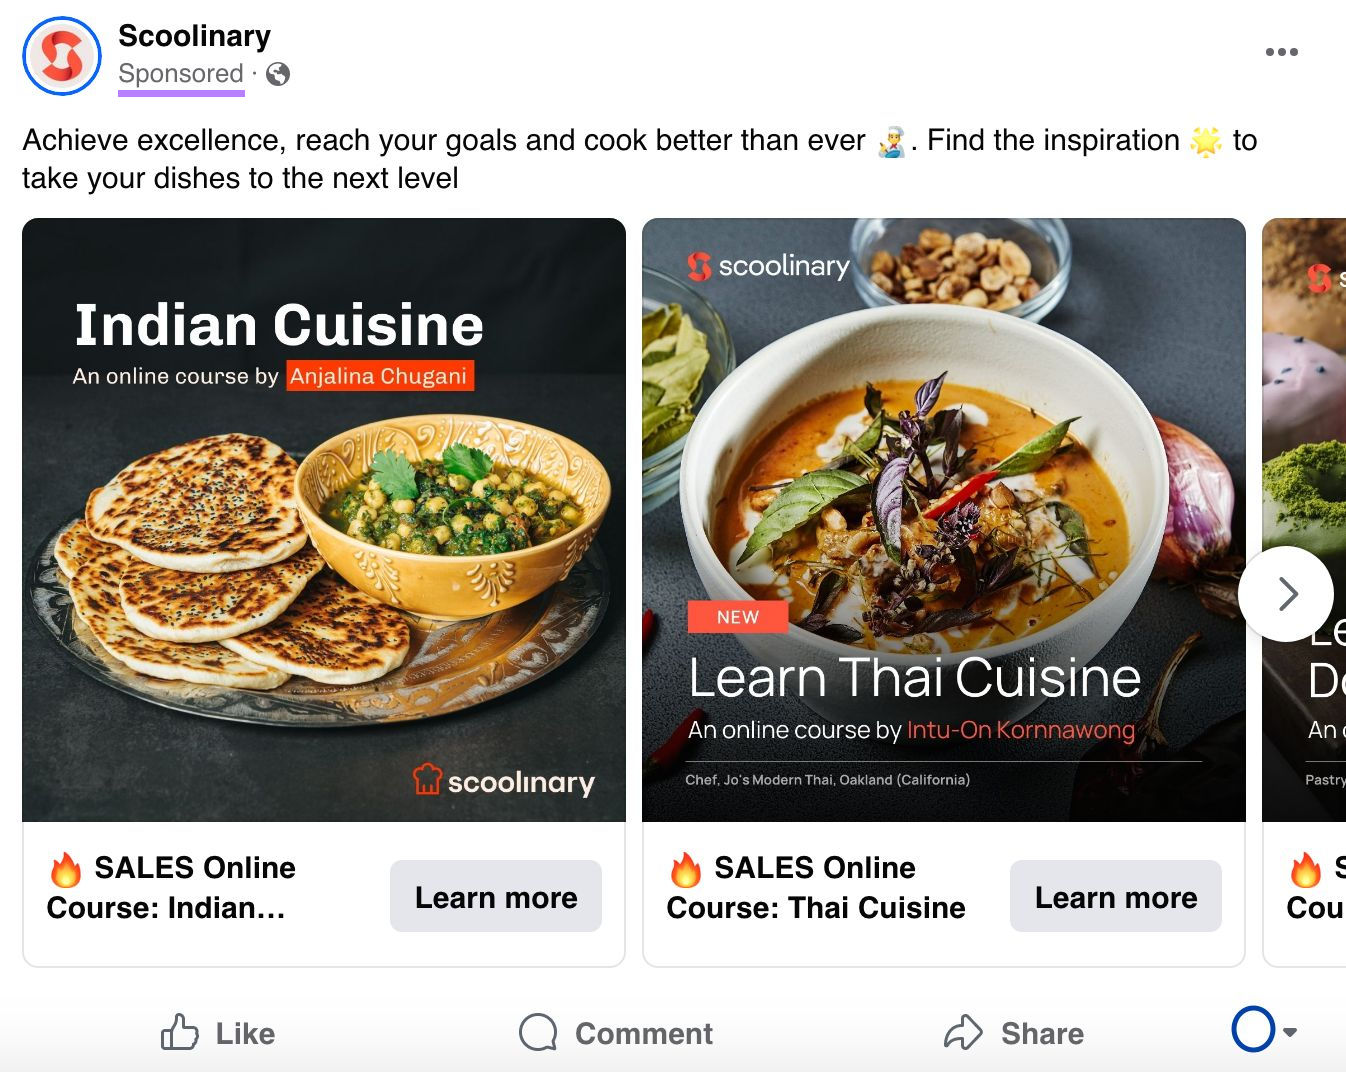 A carousel advertisement  from Scoolinary connected  Facebook